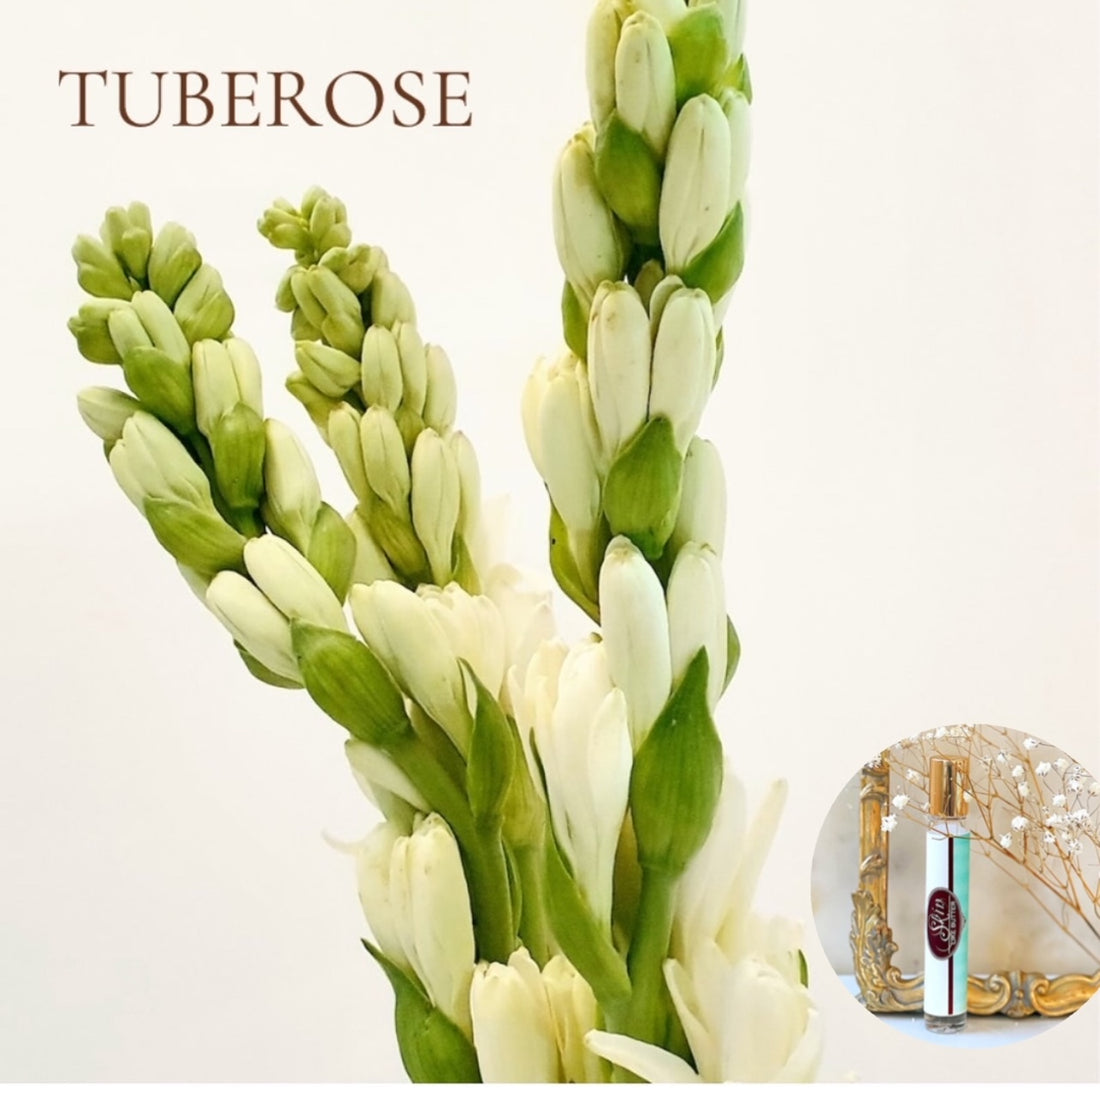 TUBEROSE  Roll On Perfume Deal ~  Buy 1 get 1 50% off-use coupon code 2PLEASE